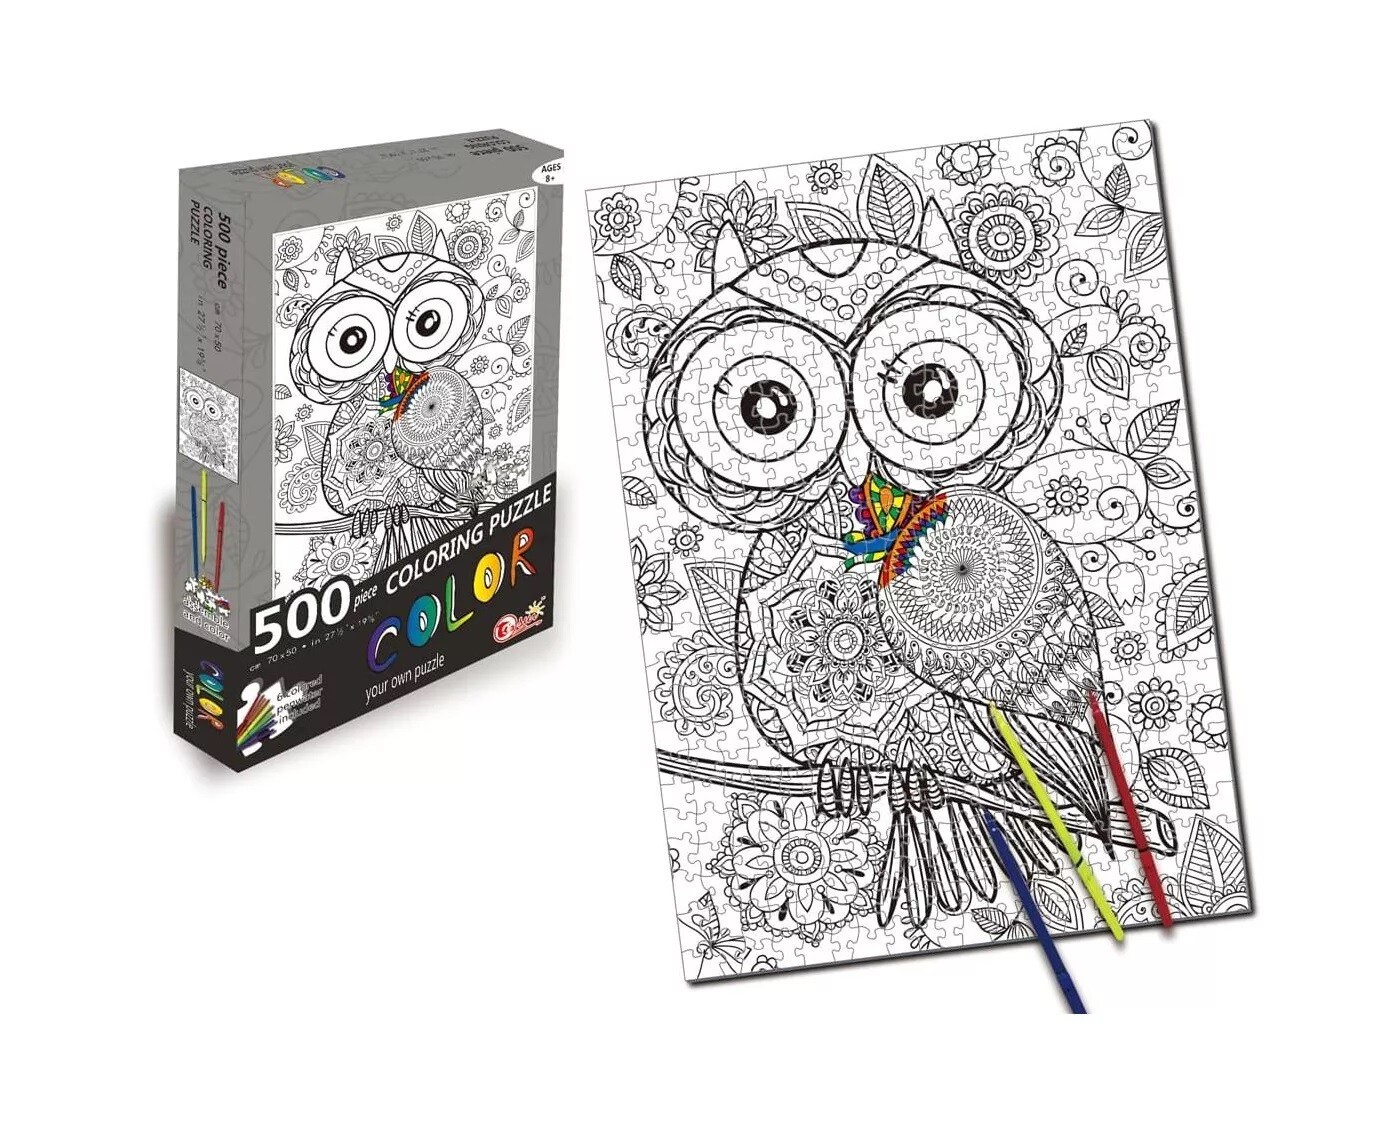 SET OF 2 - 500 Piece Colouring Jigsaw Puzzles - Sea World and Owl